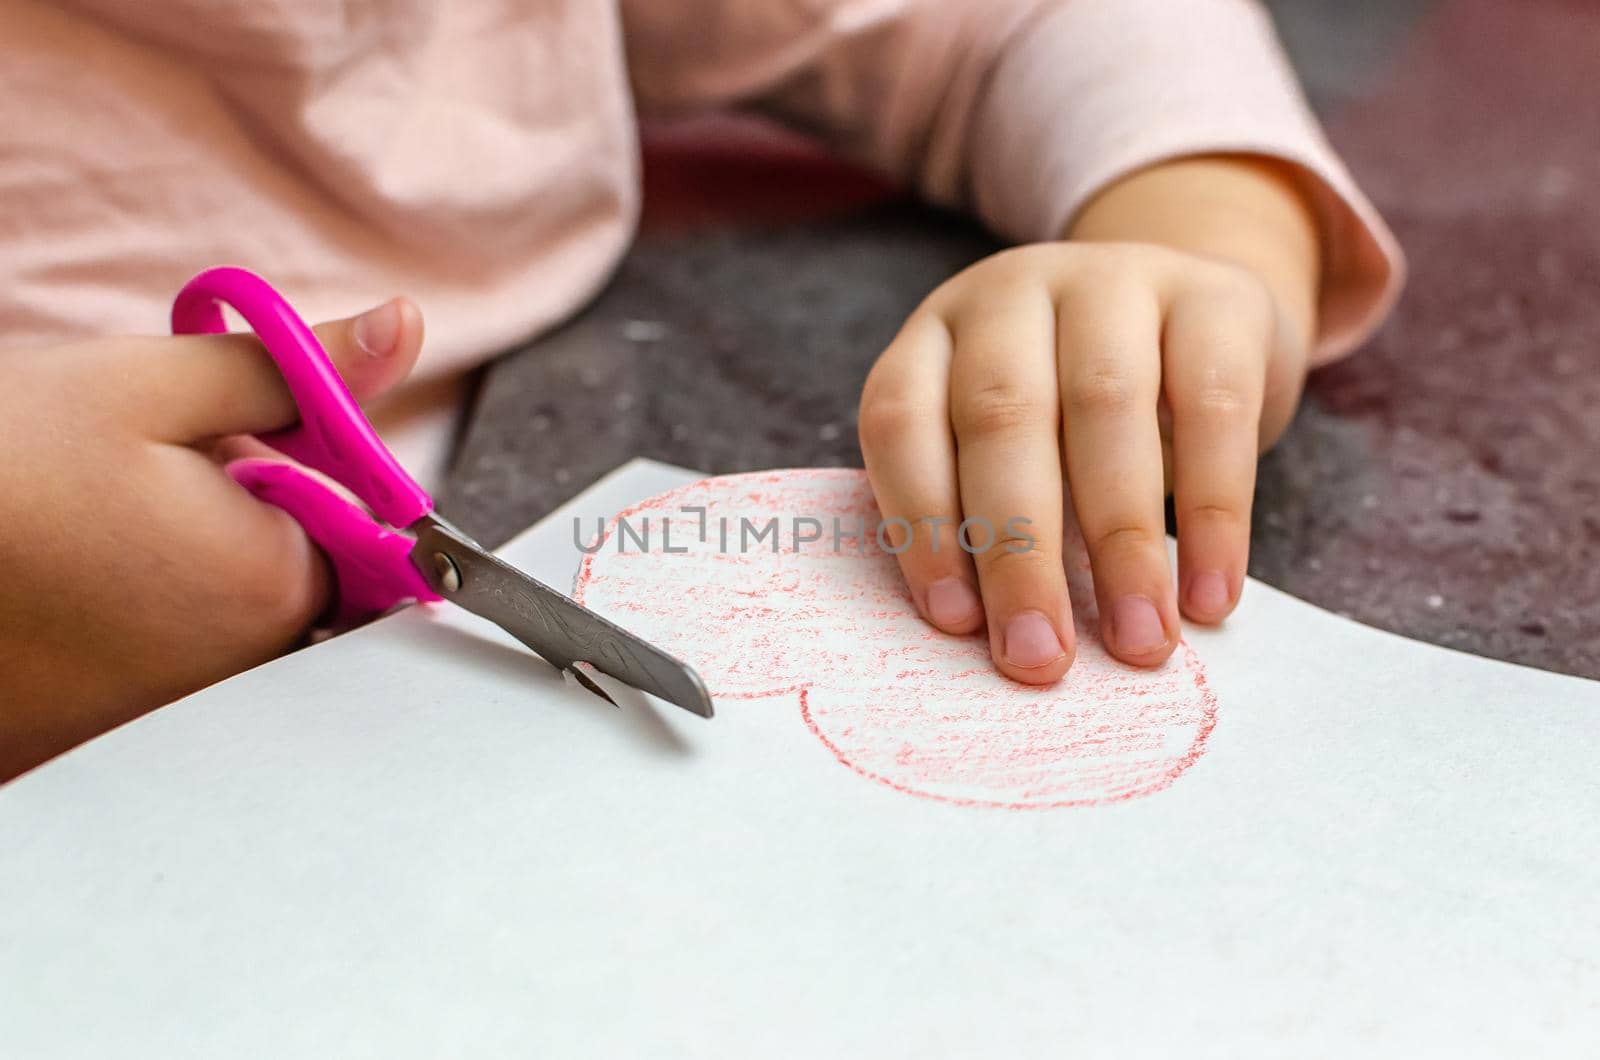 The girl's hand holds a heart cut from paper. Children's creativity - drawings and crafts for Valentine's Day or Mother's Day. by SERSOL